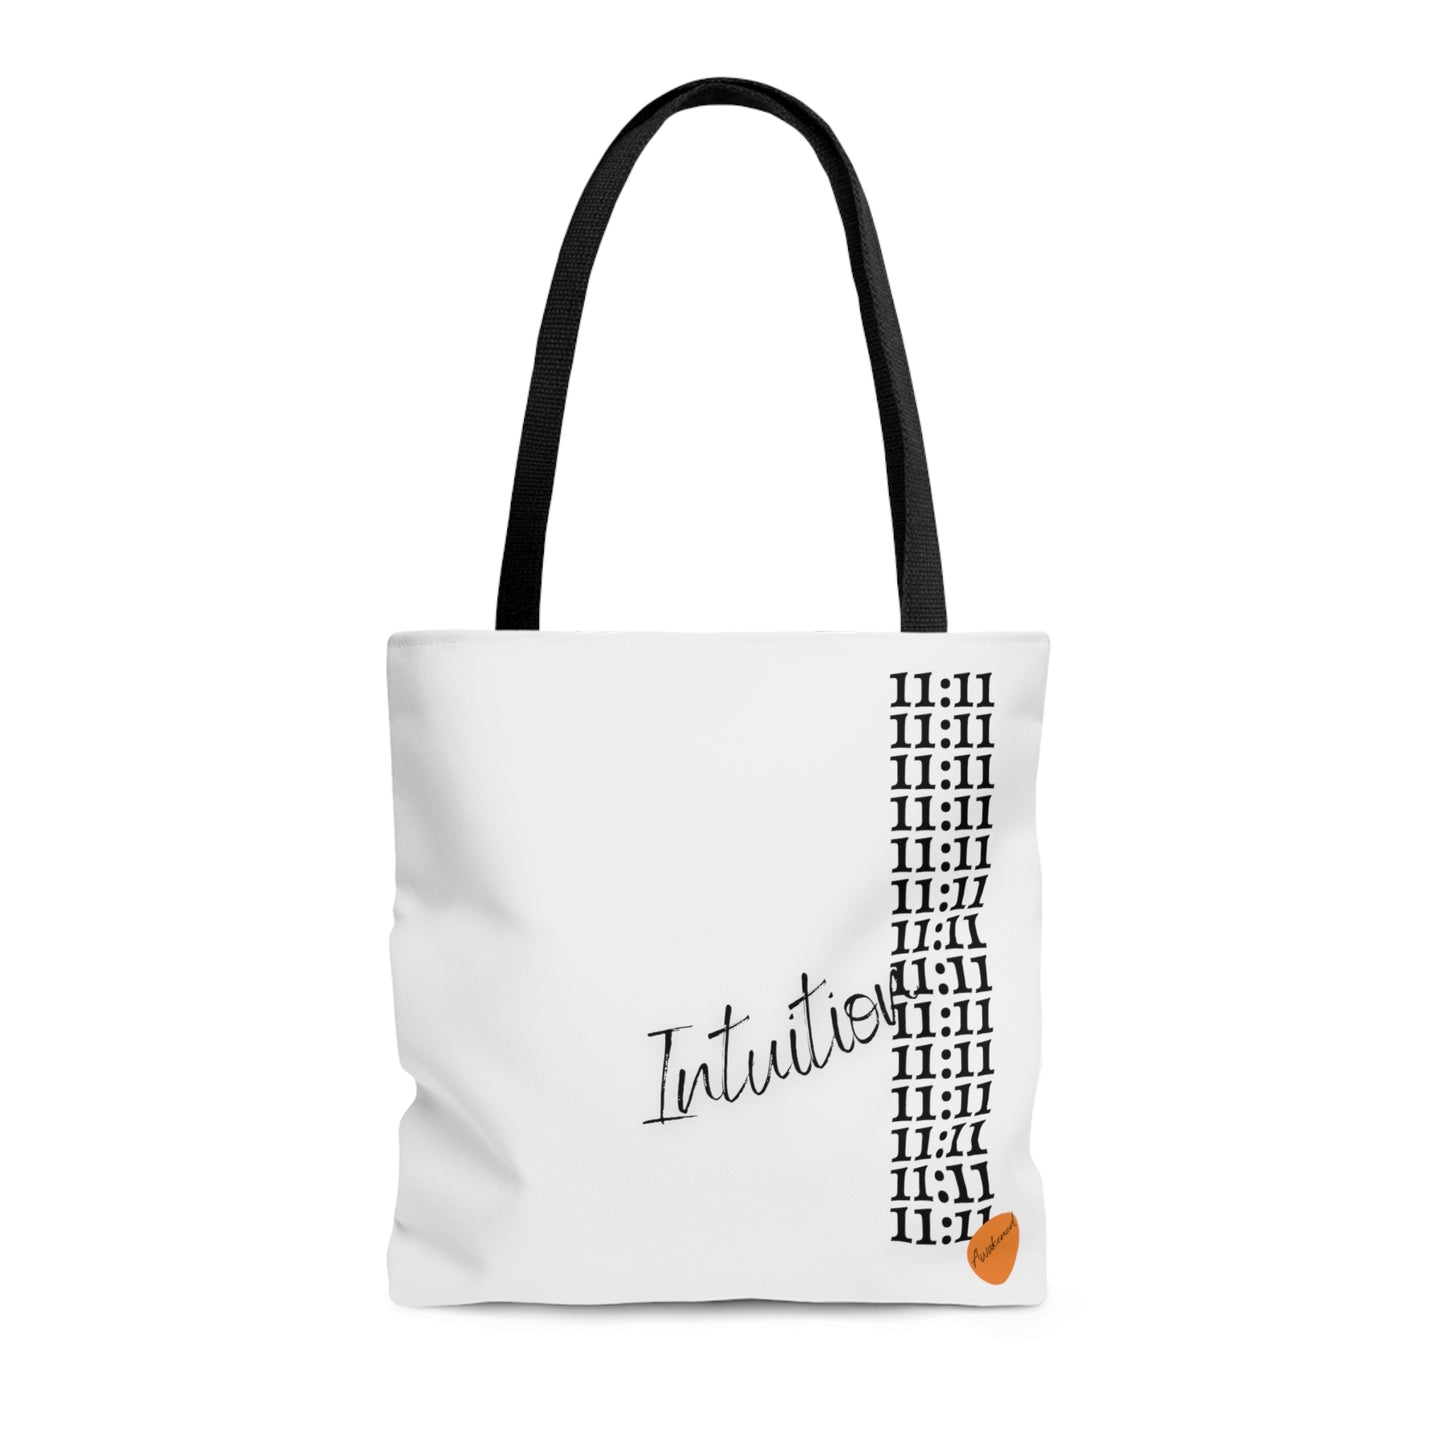 Intuition bag 1111